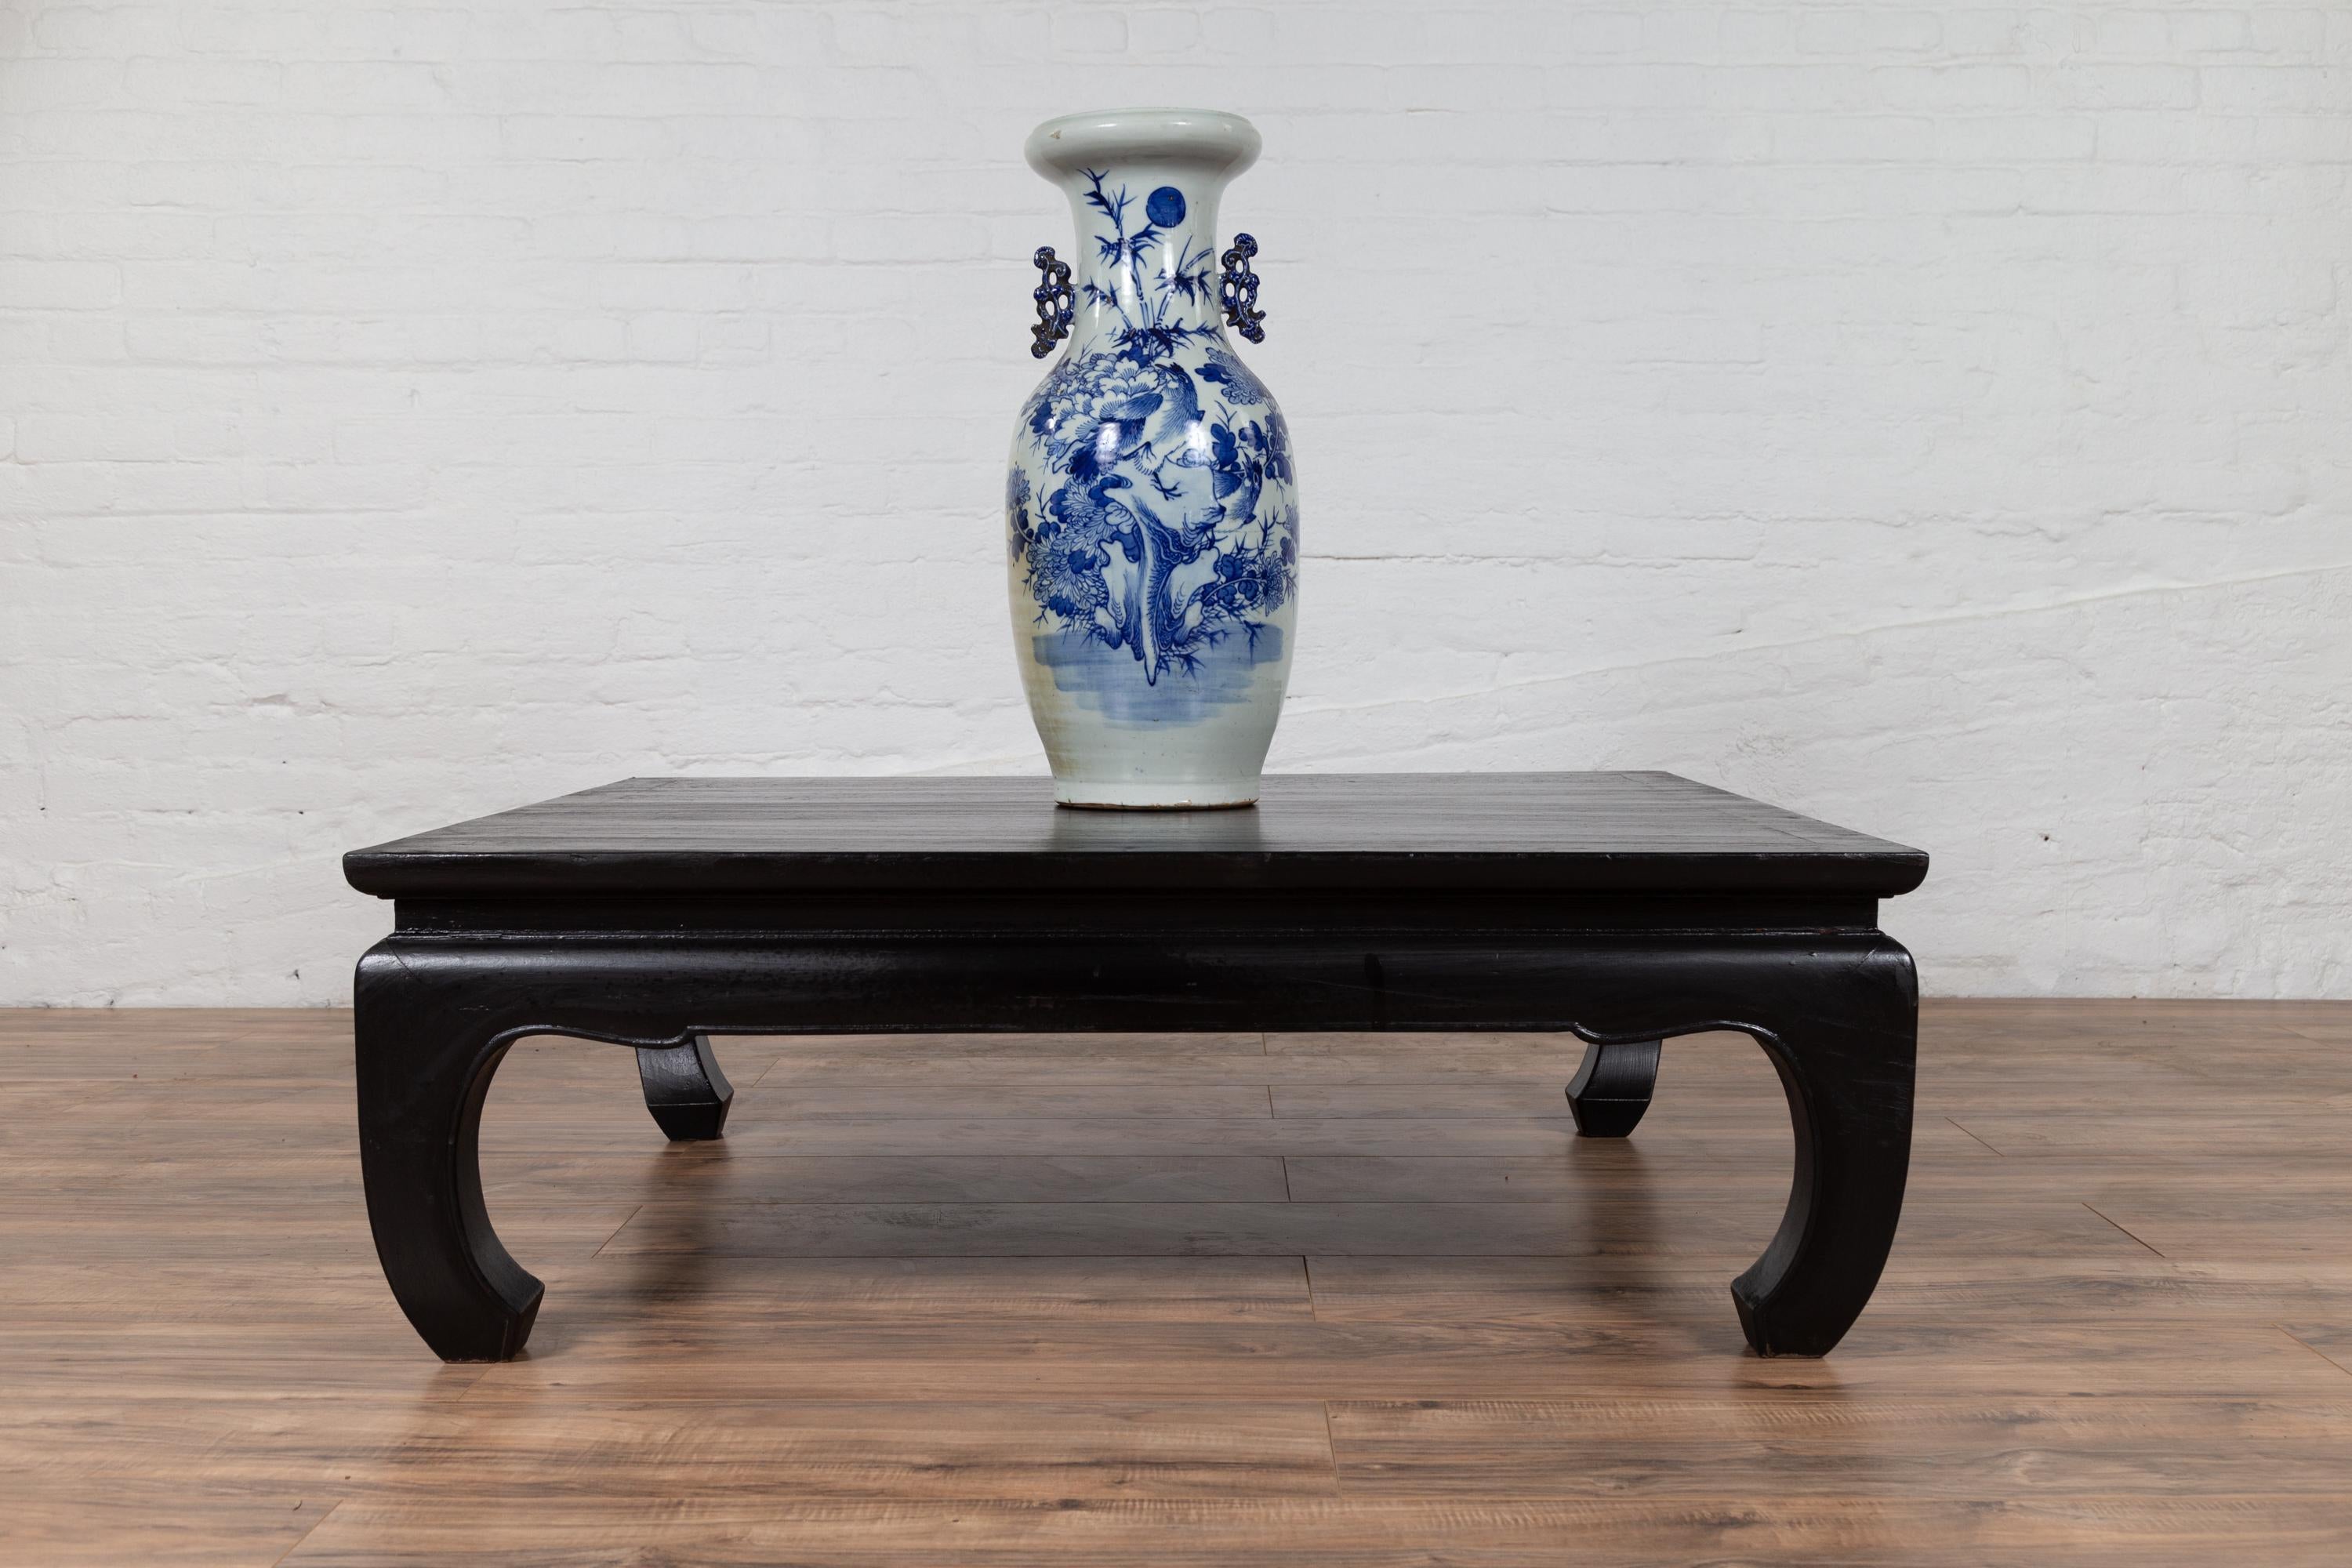 A vintage Thai teak wood coffee table from the mid-20th century, with black lacquer finish and bulging Chow legs. Born in Thailand during the mid-century period, this teak coffee table features a square planked waisted top sitting above an